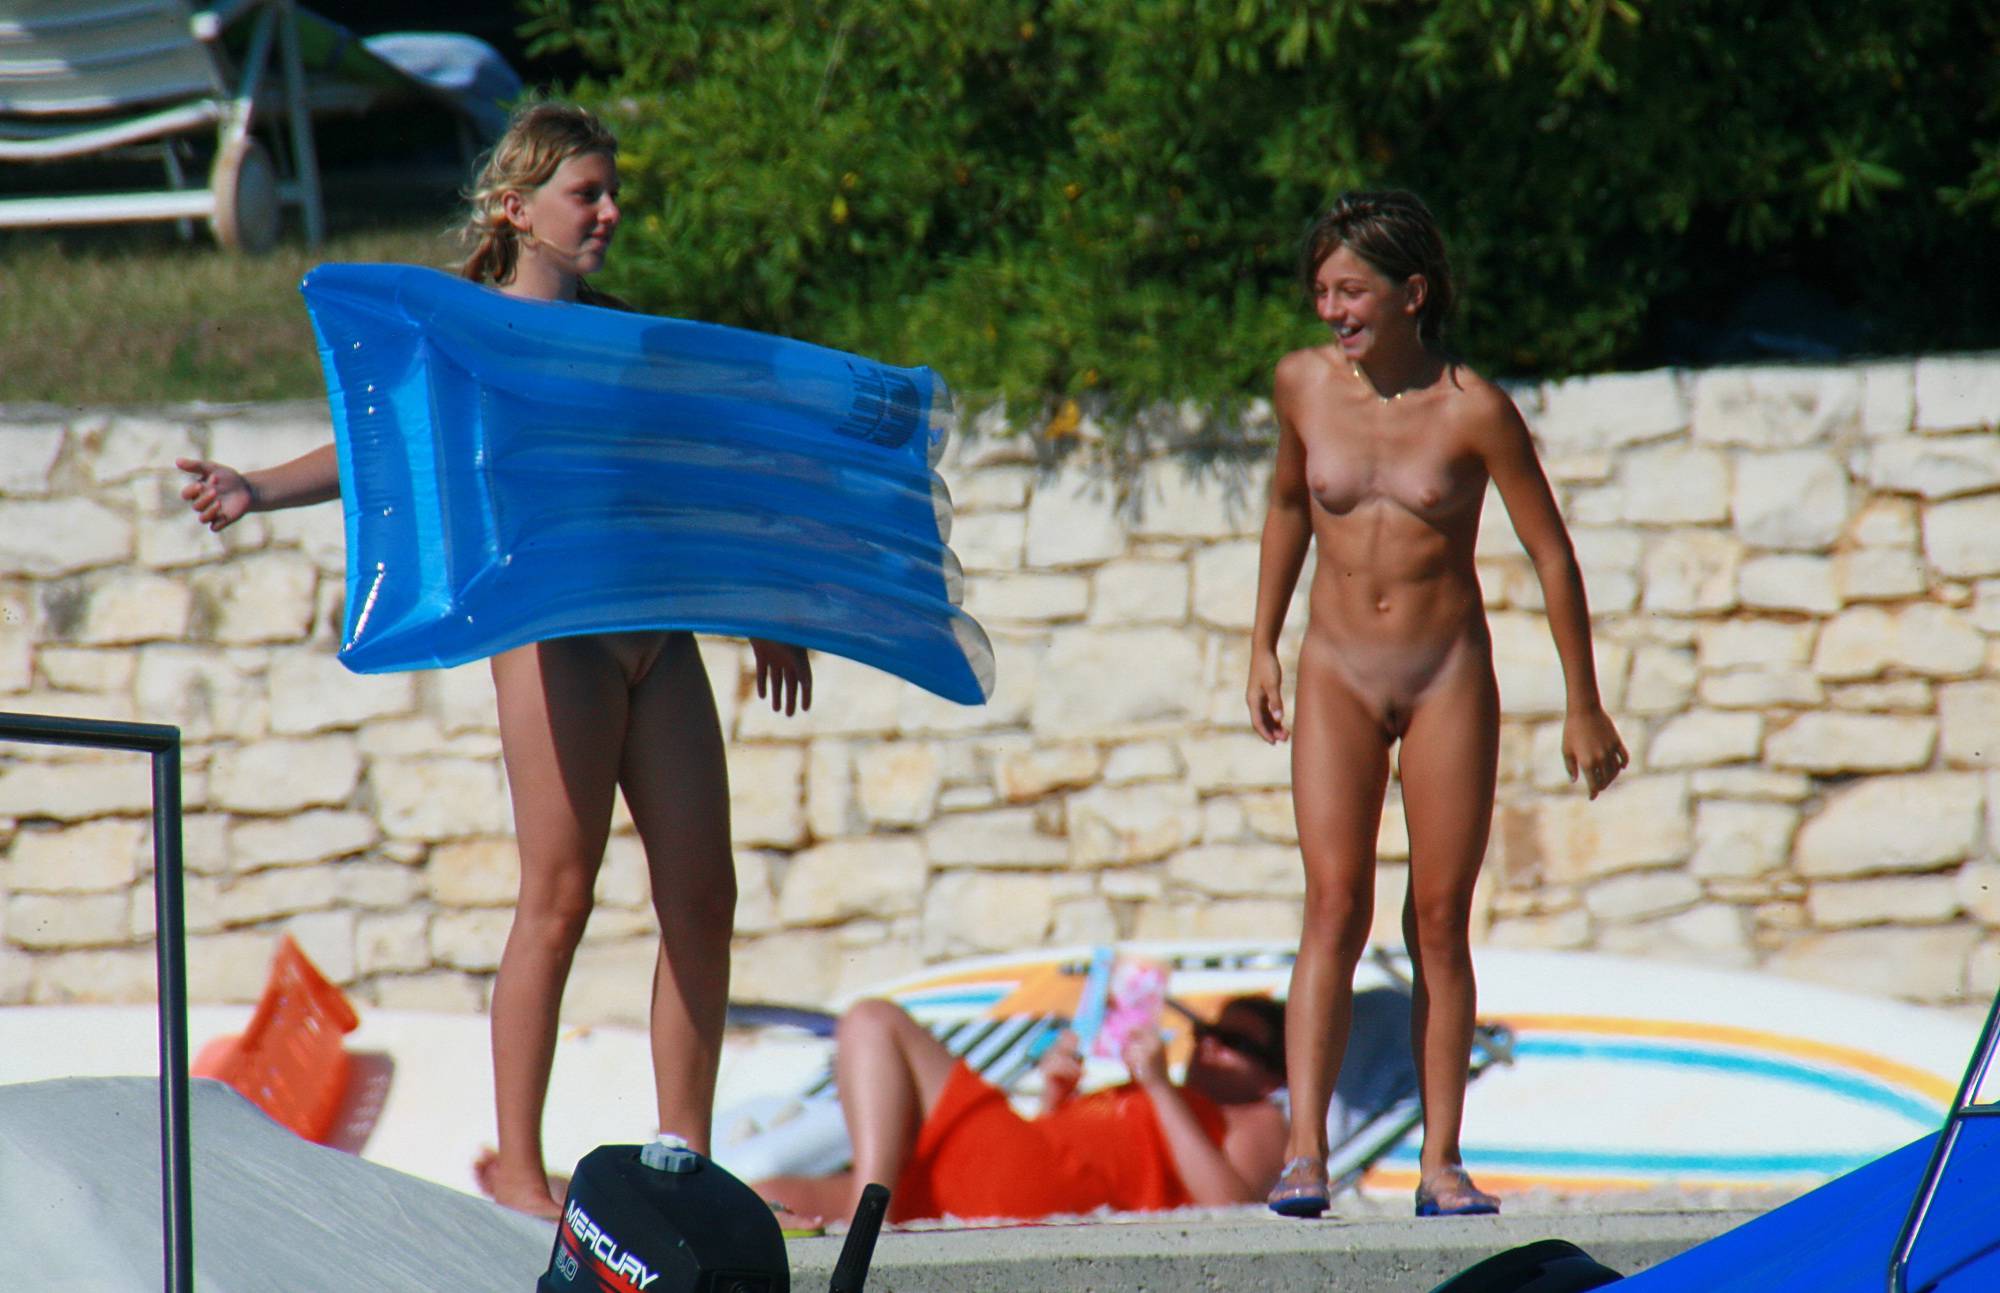 Pure Nudism-Inflatable Beach Raft Time - 1